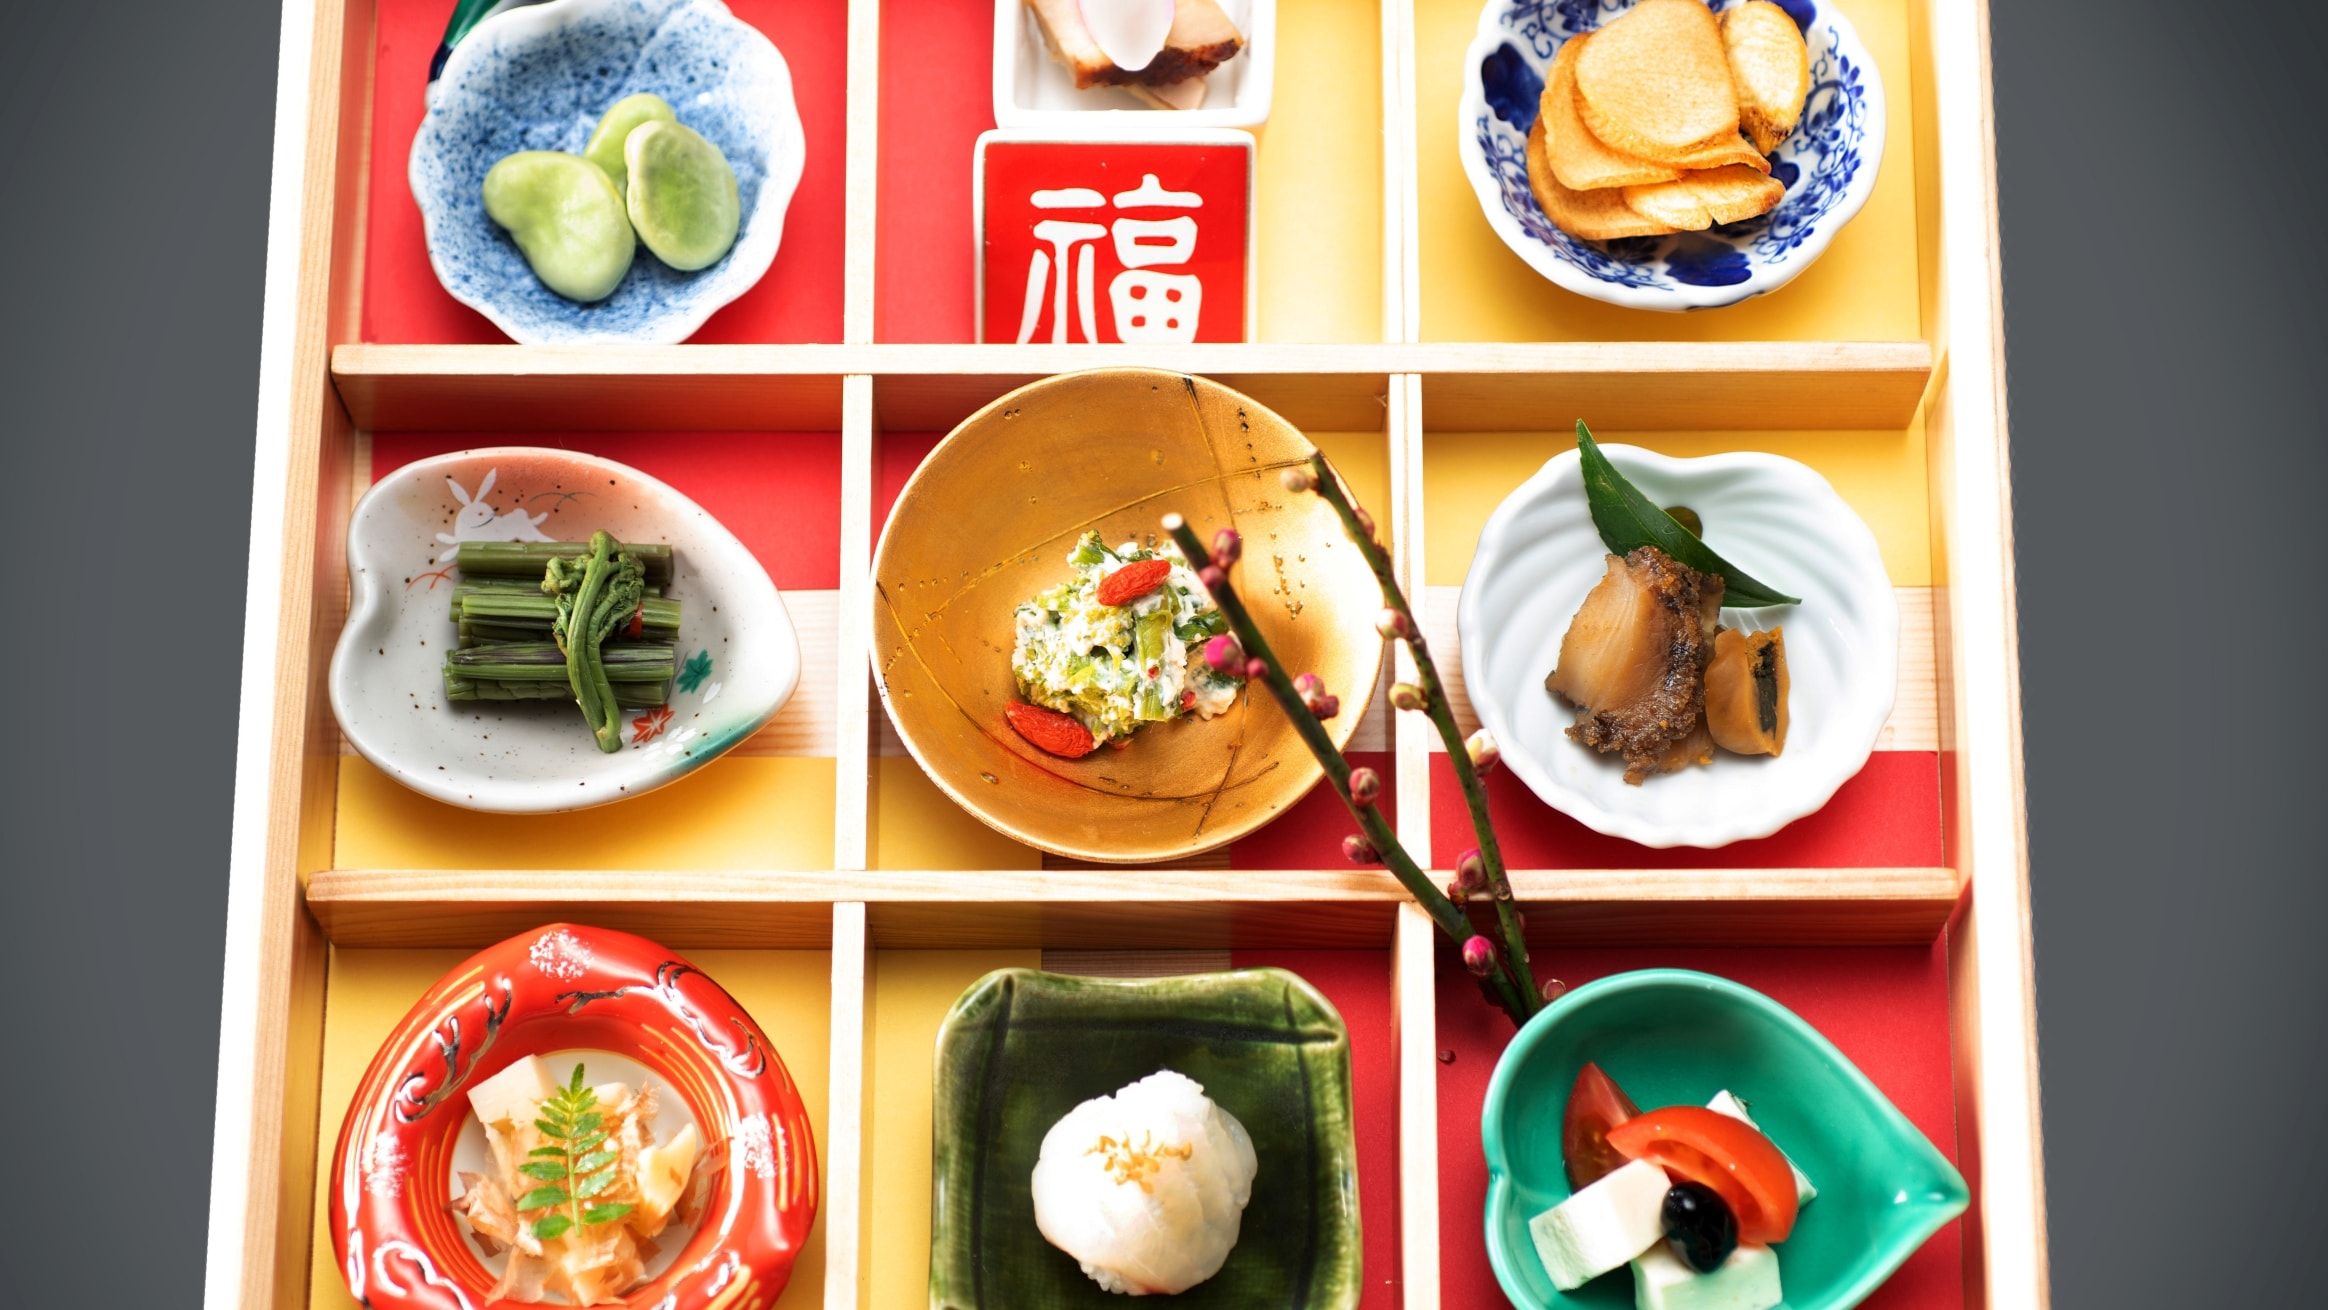 All 9 appetizers that look beautiful are homemade by Minoya♪ Please enjoy them carefully!